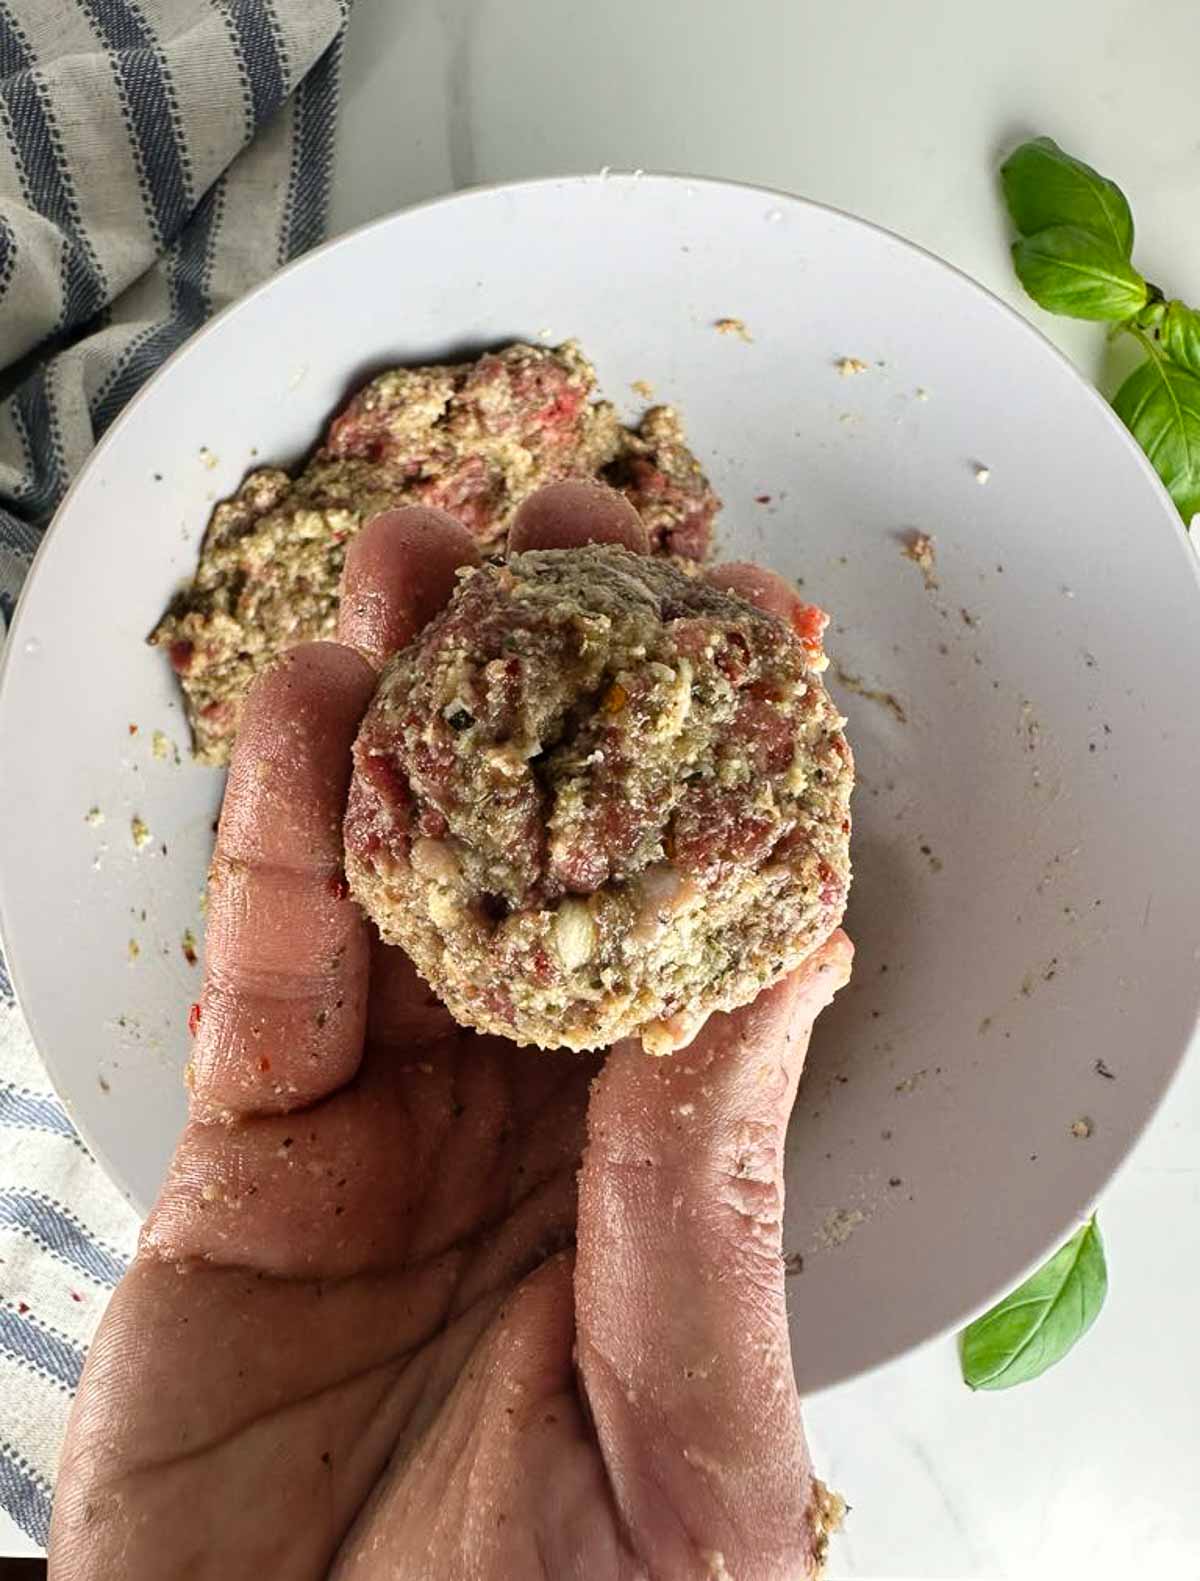 Roll the meat mixture into equal sized round meatballs.